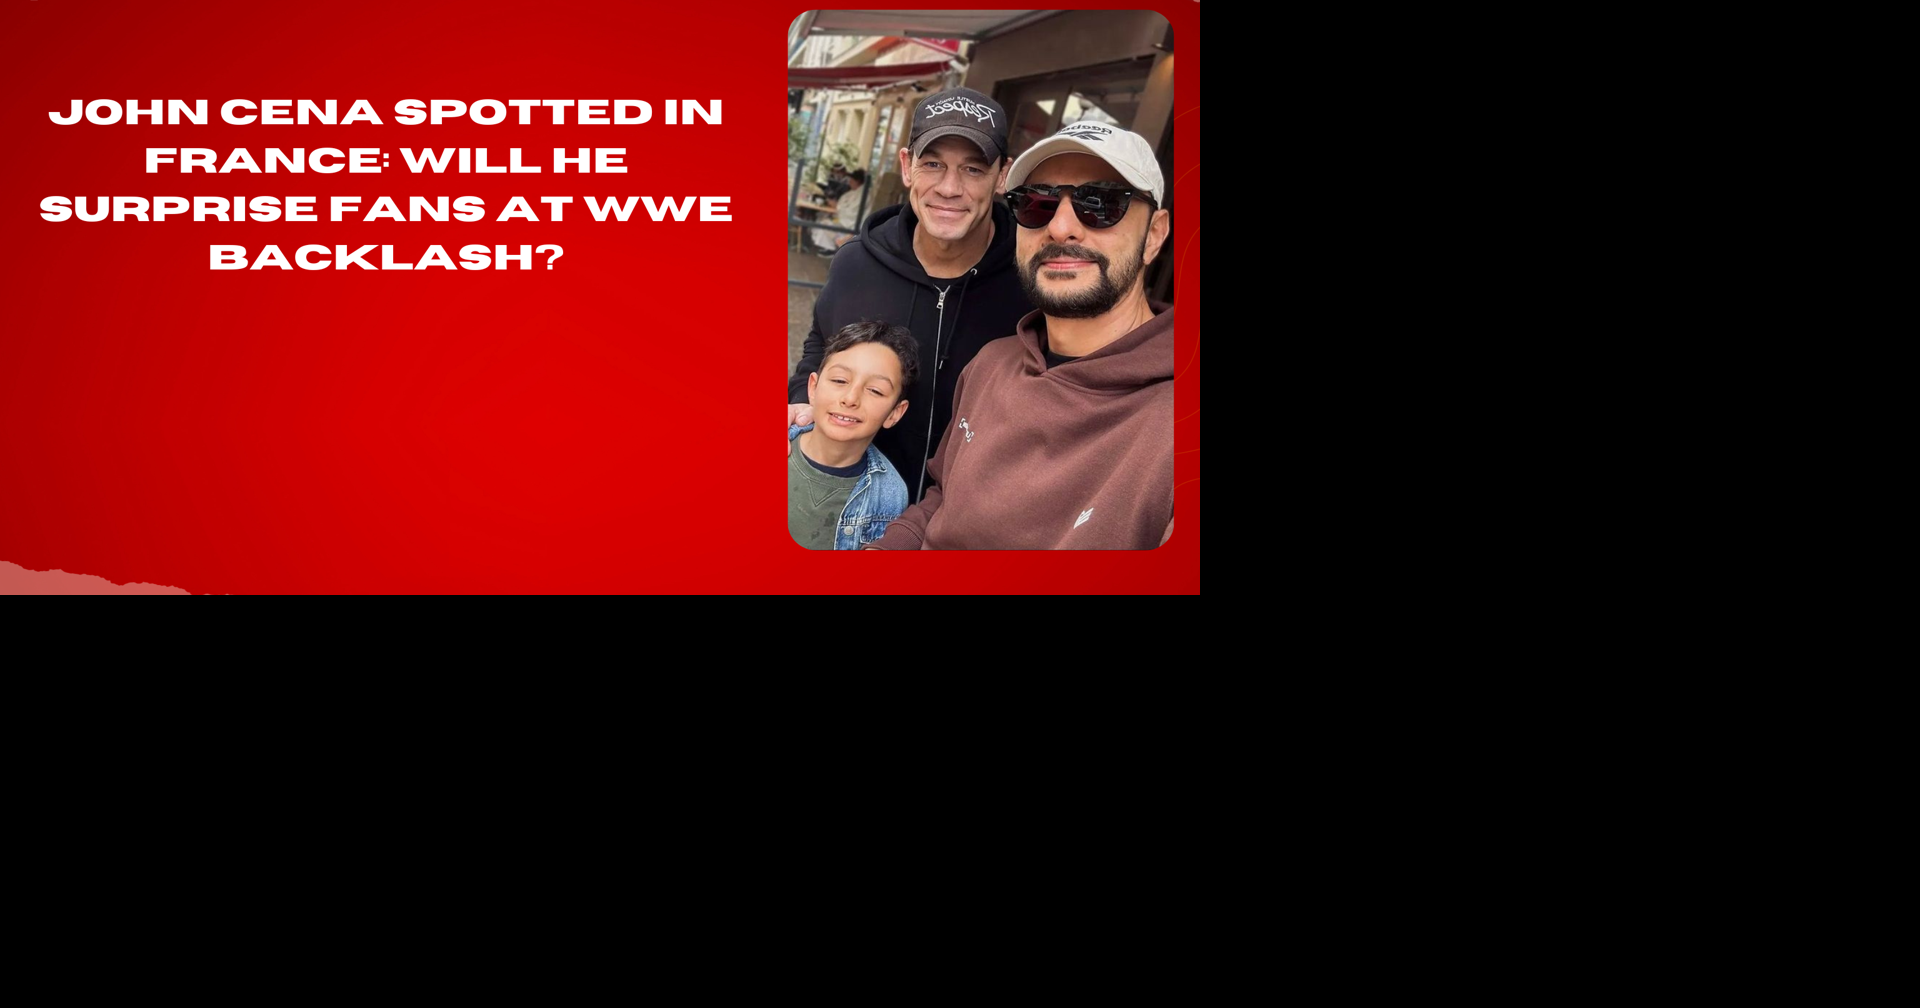 John Cena Spotted in France Will He Surprise Fans at WWE Backlash 